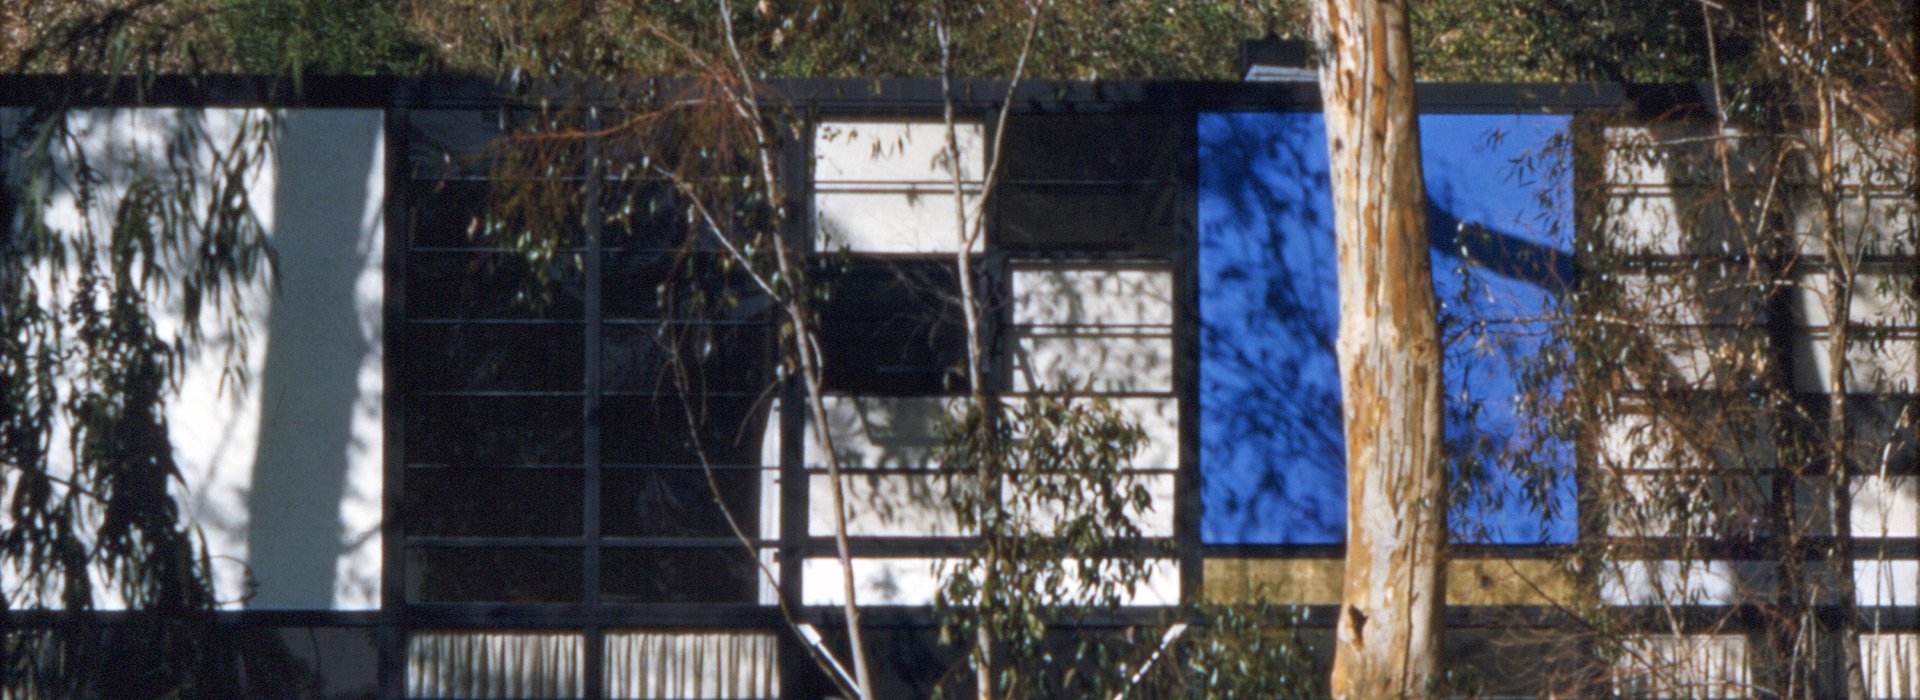 Exterior view of the second floor of the Eames House